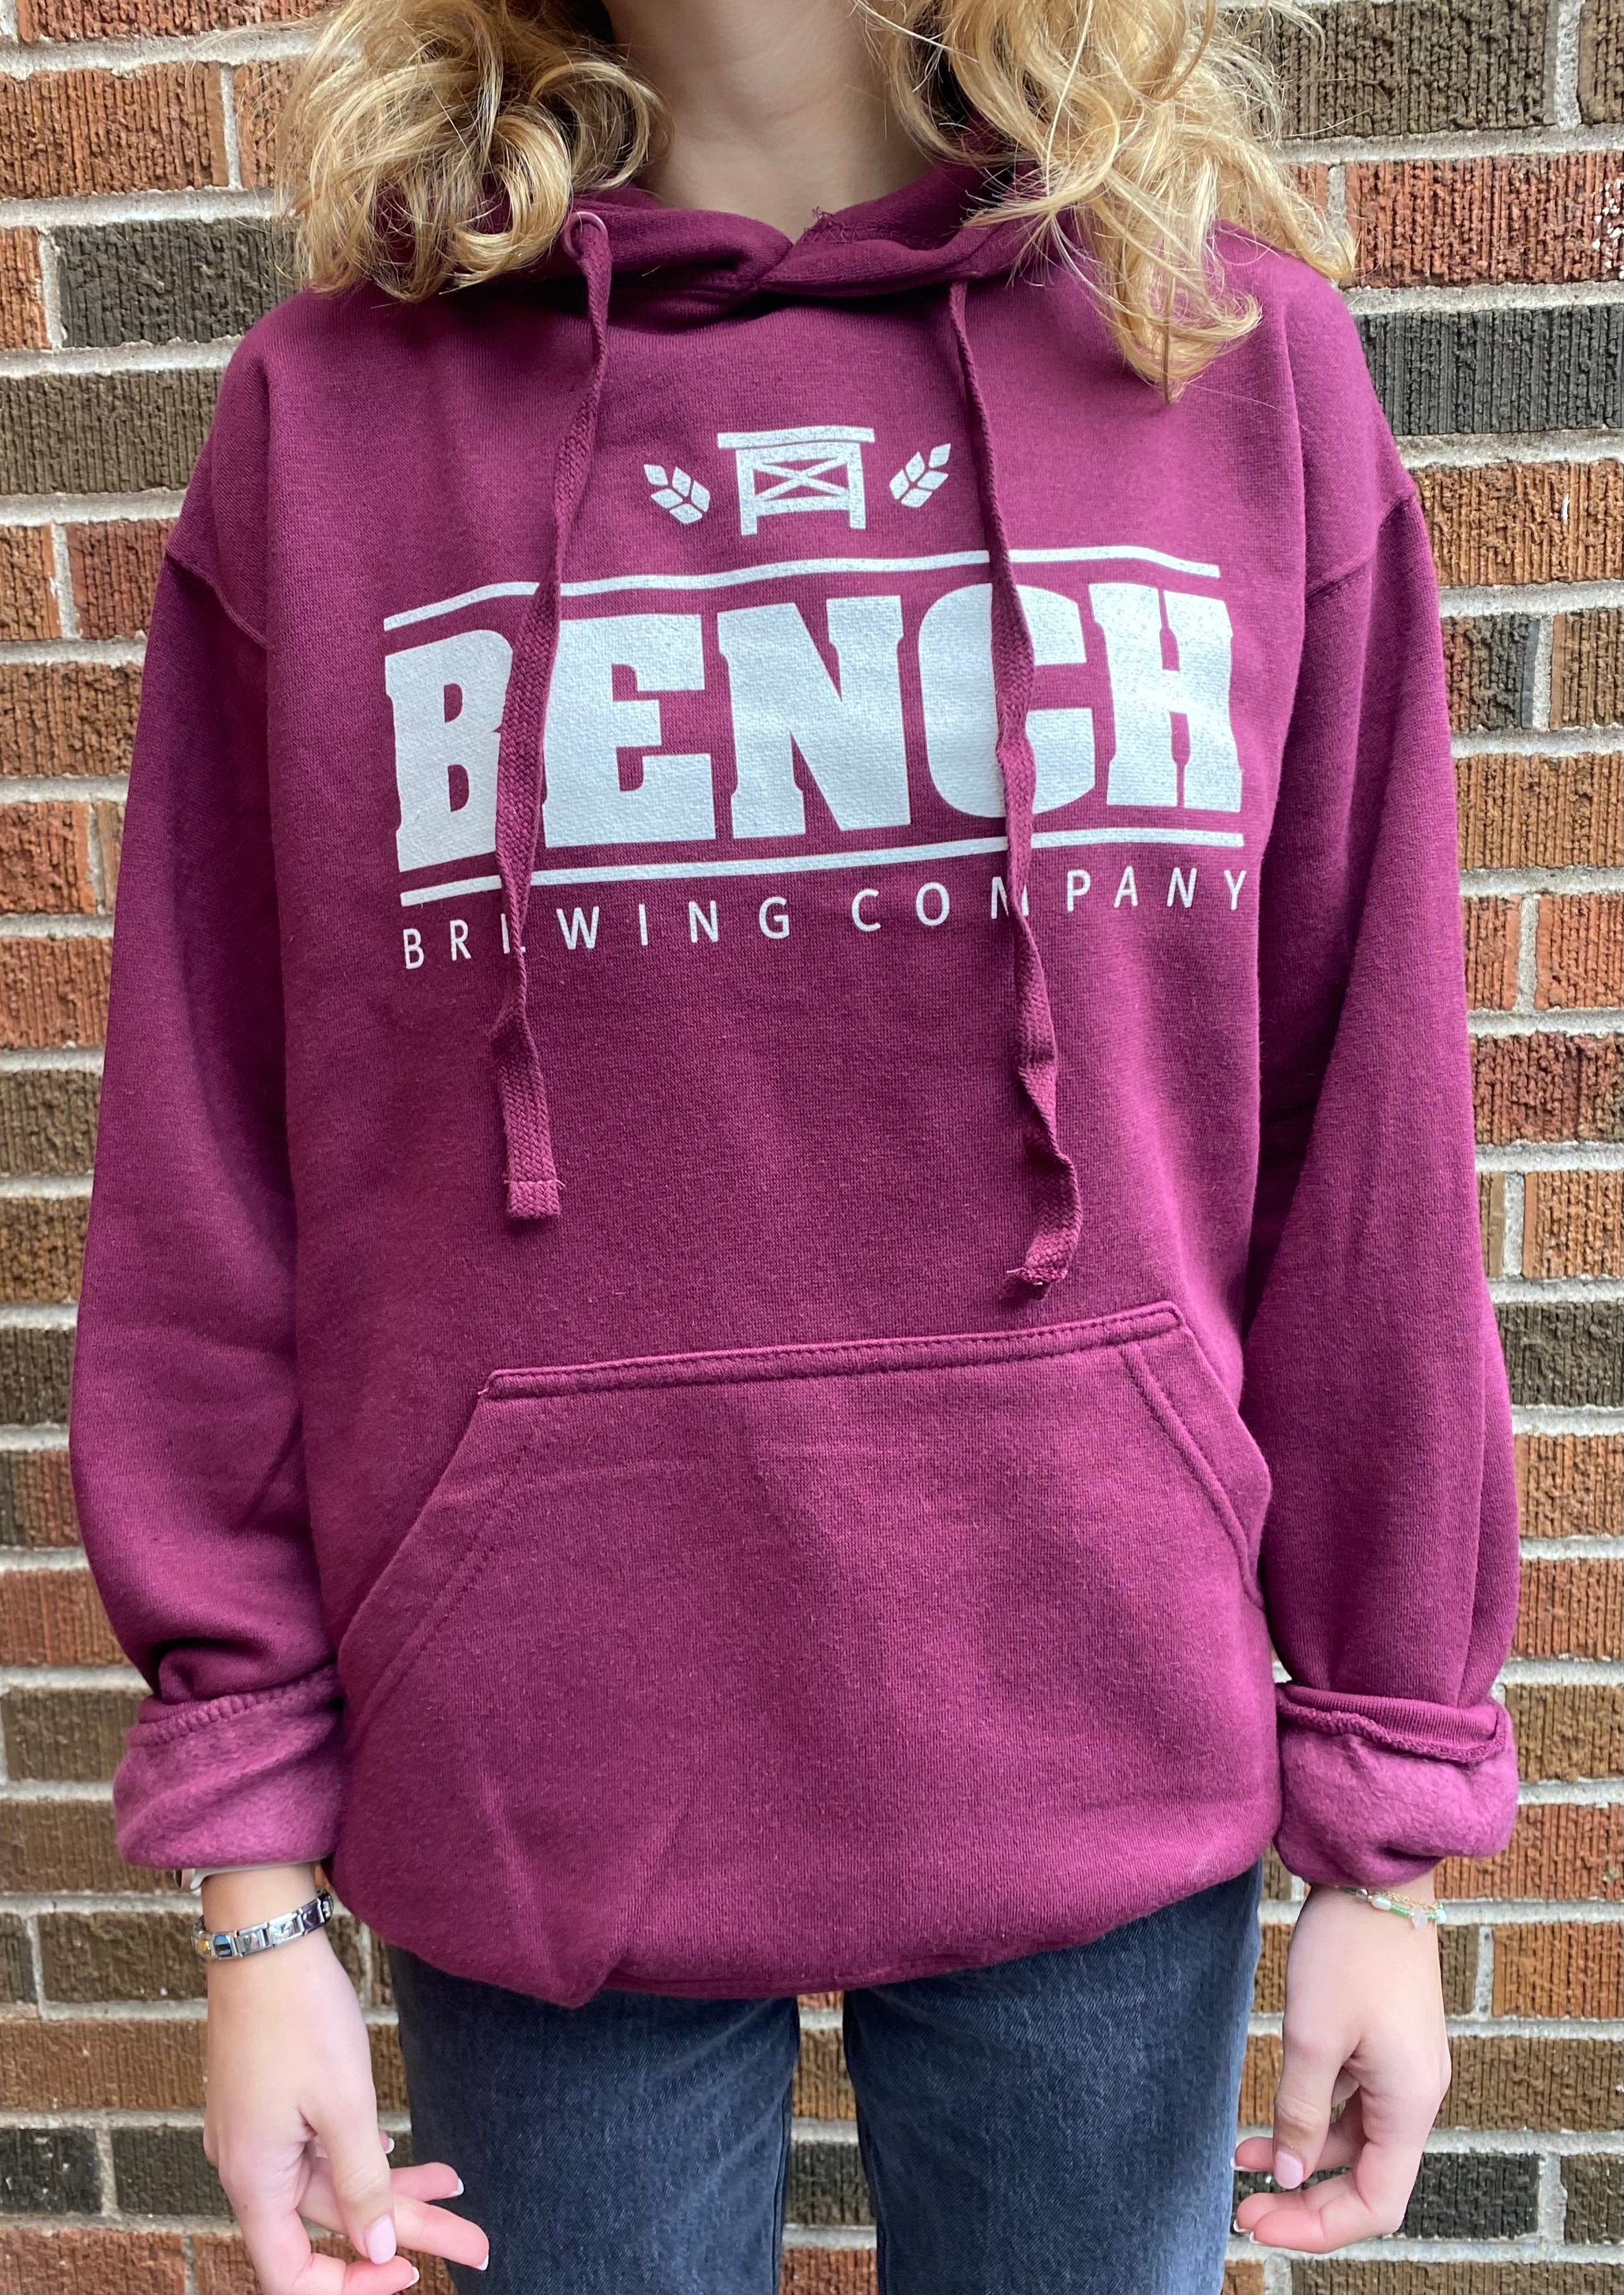 – Brewing Shop Bench Bench Company Hoodie